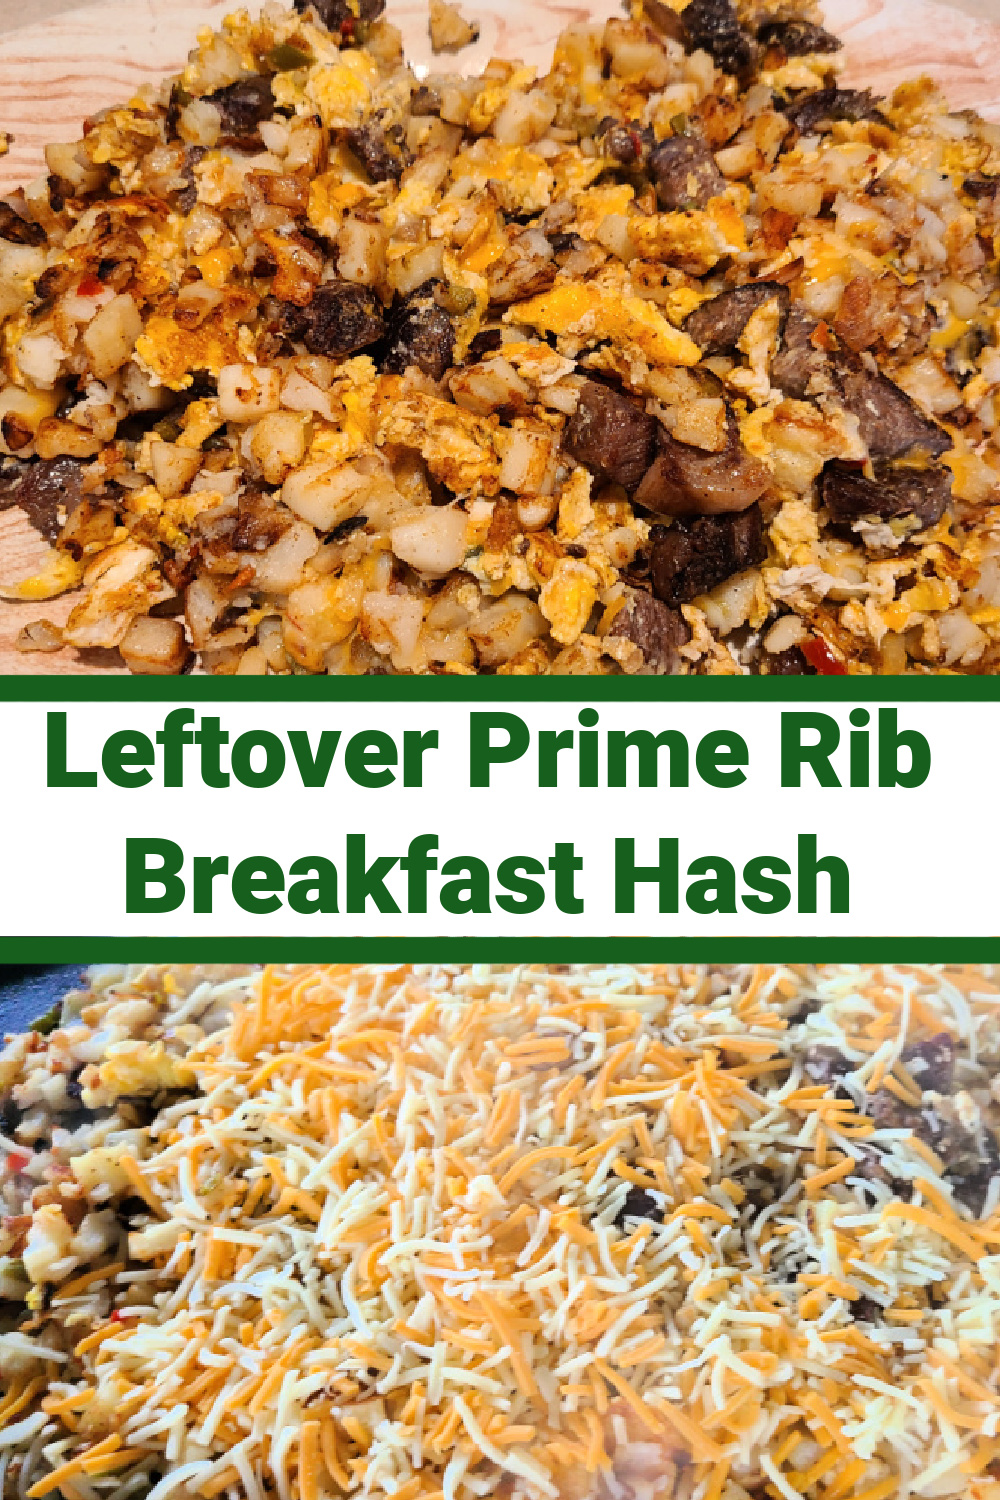 Leftover Prime Rib Breakfast Hash is perfect to use up leftover holiday smoked prime rib! The Blackstone or a griddle to make this meat and potato breakfast. Use Potato O Brien, eggs, and cheese to combine with the prime leftover for an amazing flavor combination! Making this on the Blackstone Griddle makes for easy cooking and clean up!